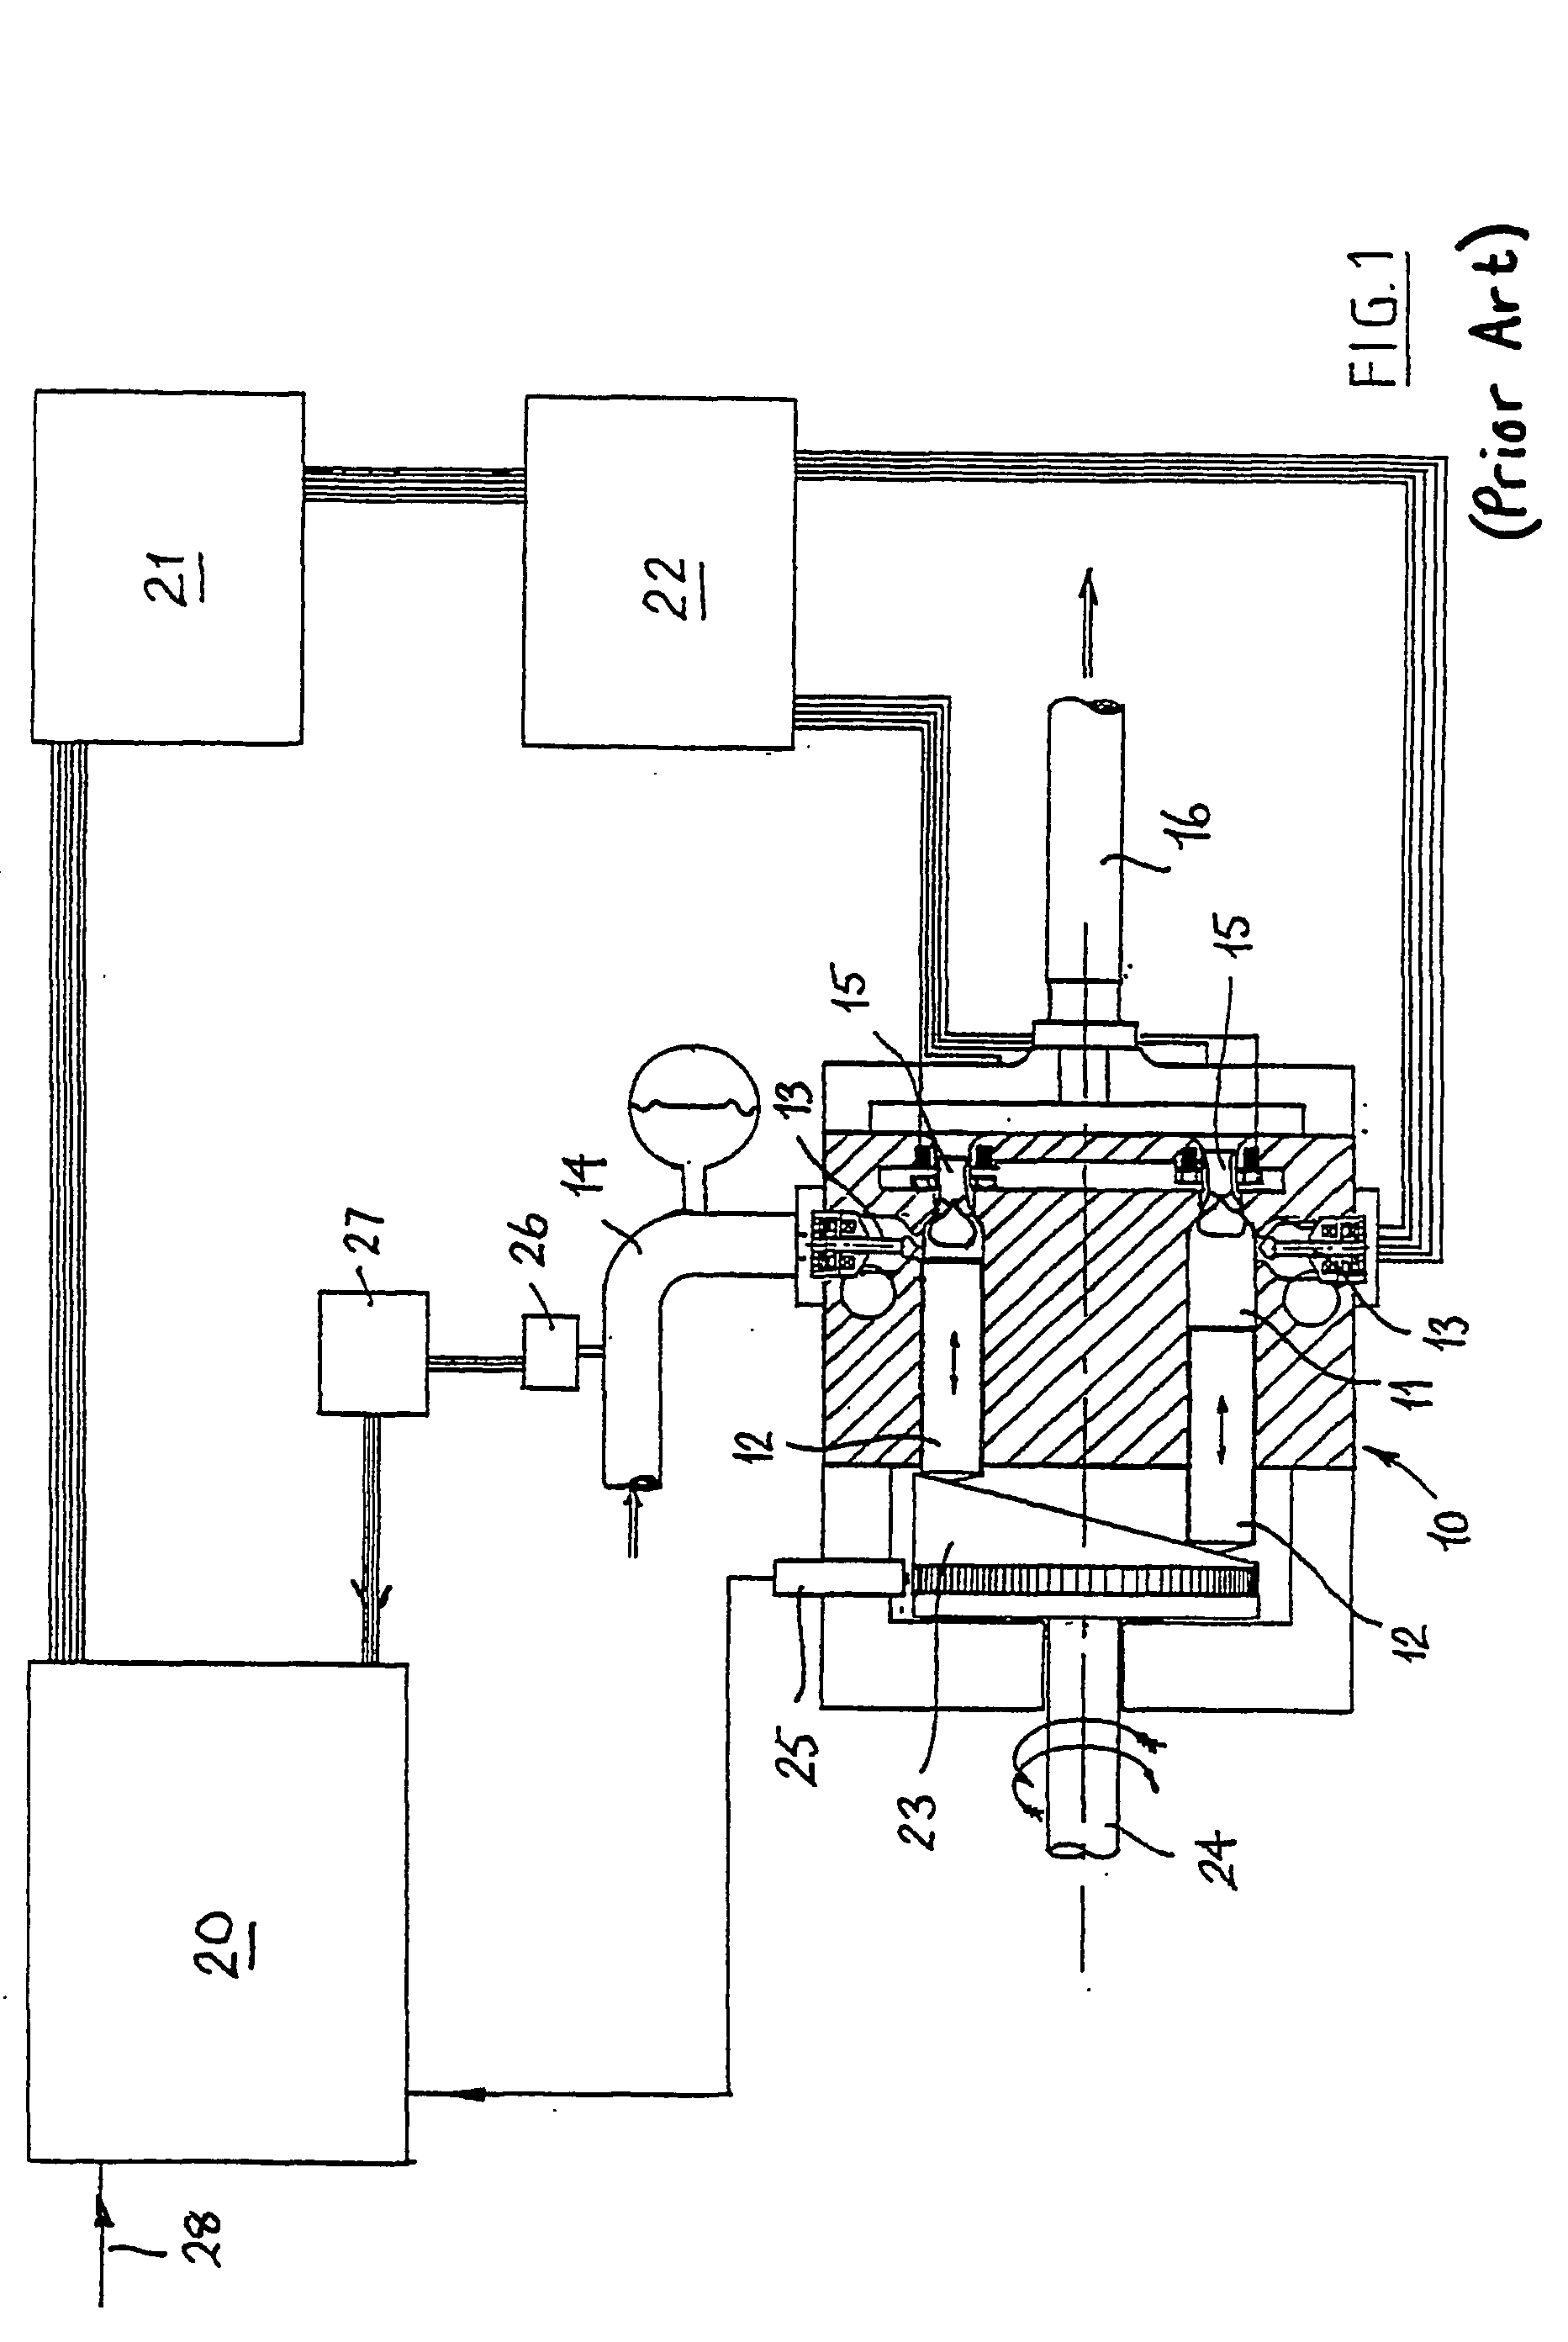 Fluid-working machine and operating method